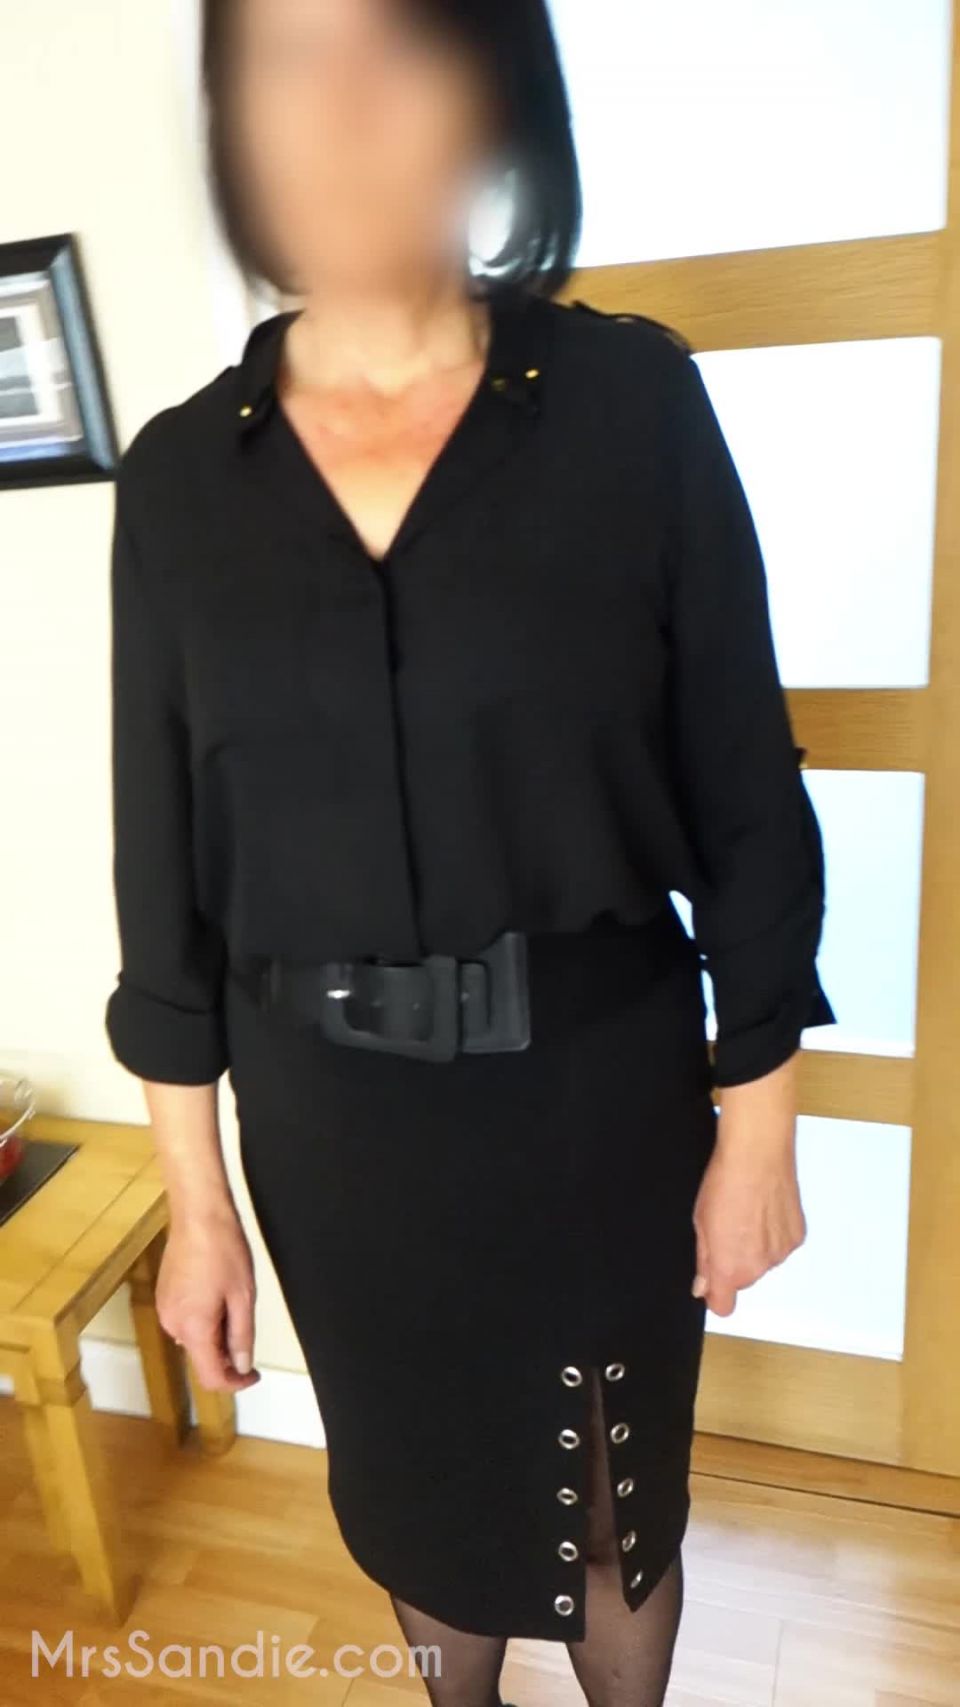 Mrs Sandie Mrssandie - black blouse split skirt and seamed tights for the office today of course they are crotc 15-10-2019